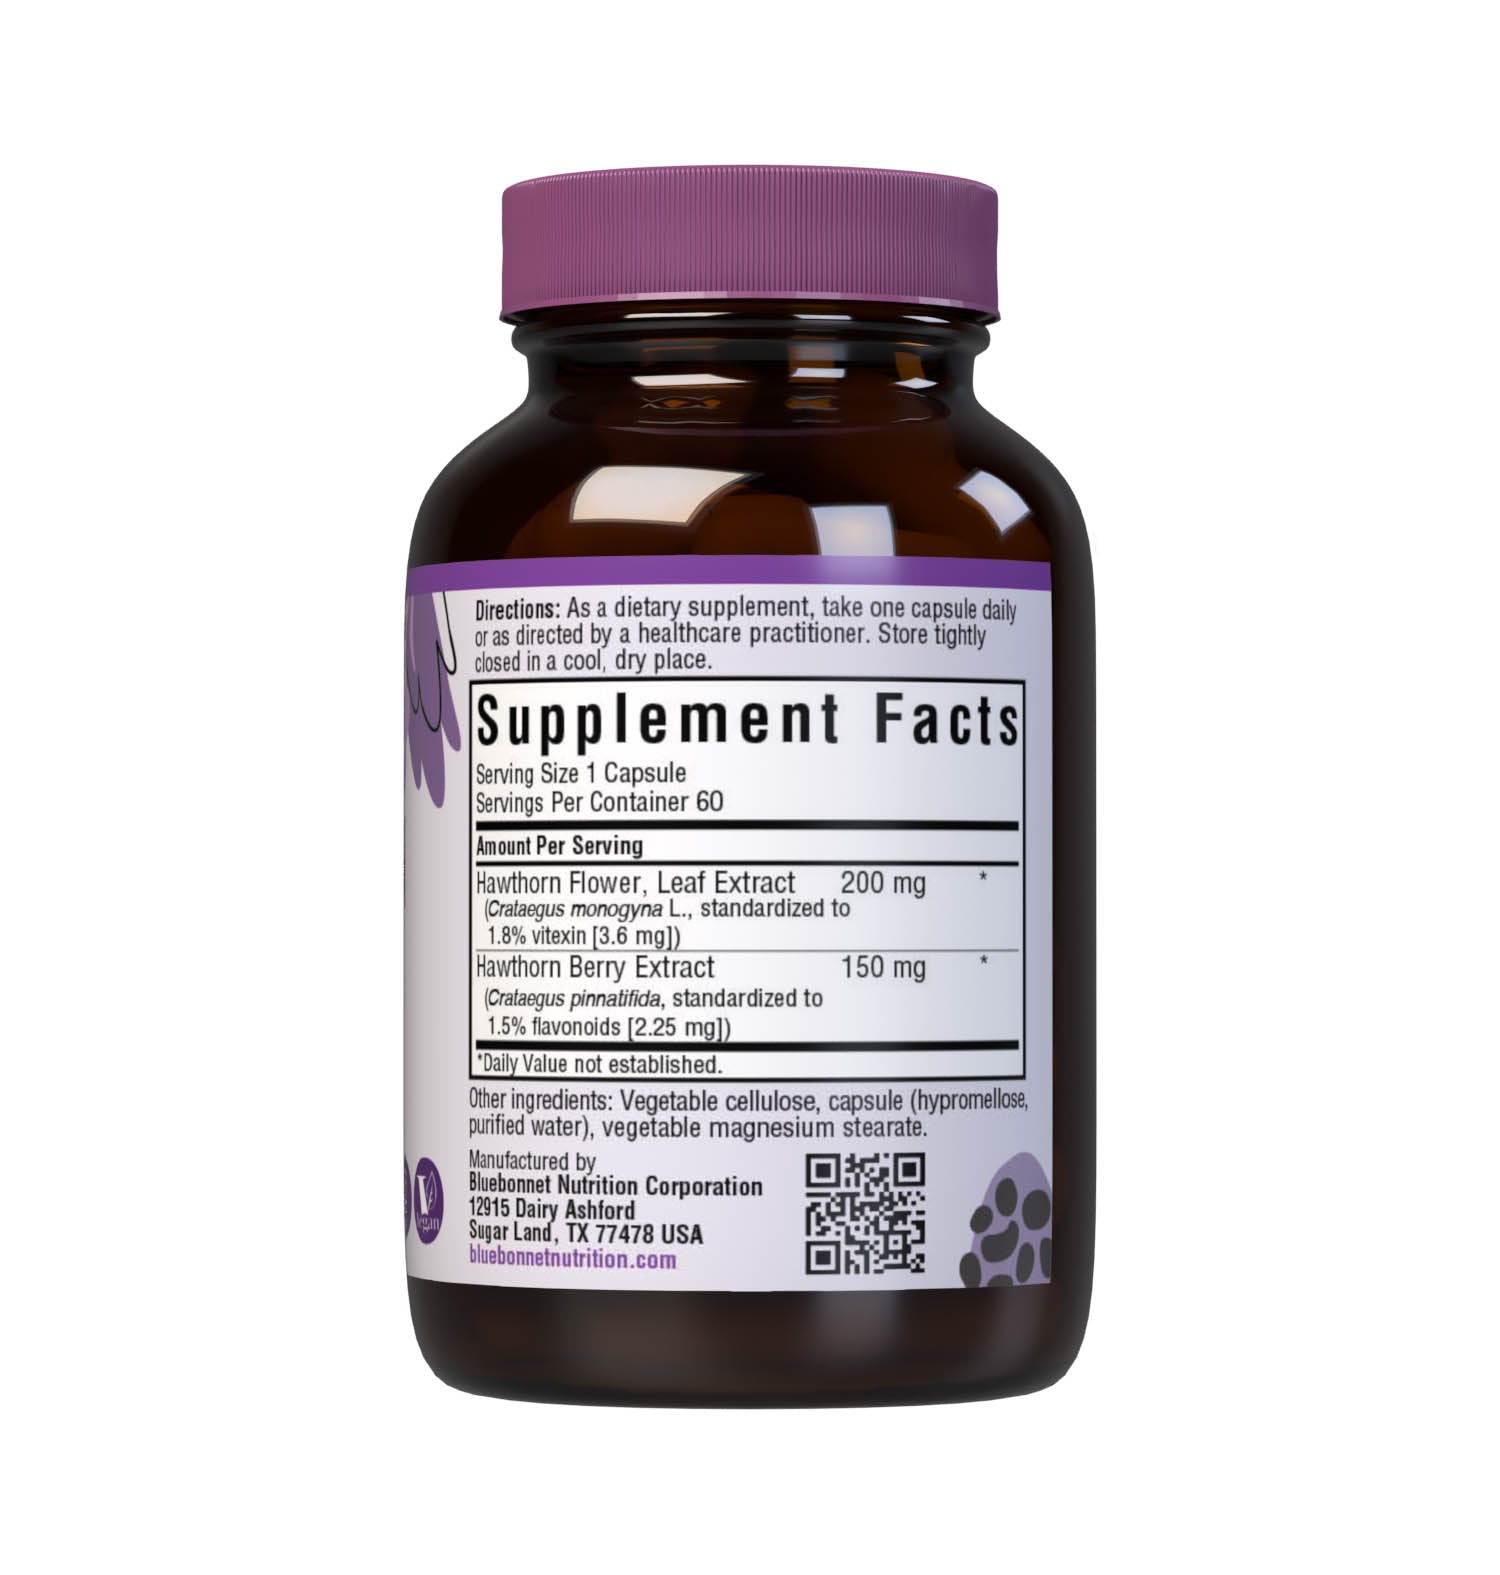 Bluebonnet’s Hawthorn Herb Extract 60 Vegetable Capsules contain a standardized extract of flavonoids and vitexin, the most researched active constituents found in hawthorn. A clean and gentle water-based extraction method is employed to capture and preserve hawthorn’s most valuable components. Supplement facts panel. #size_60 count